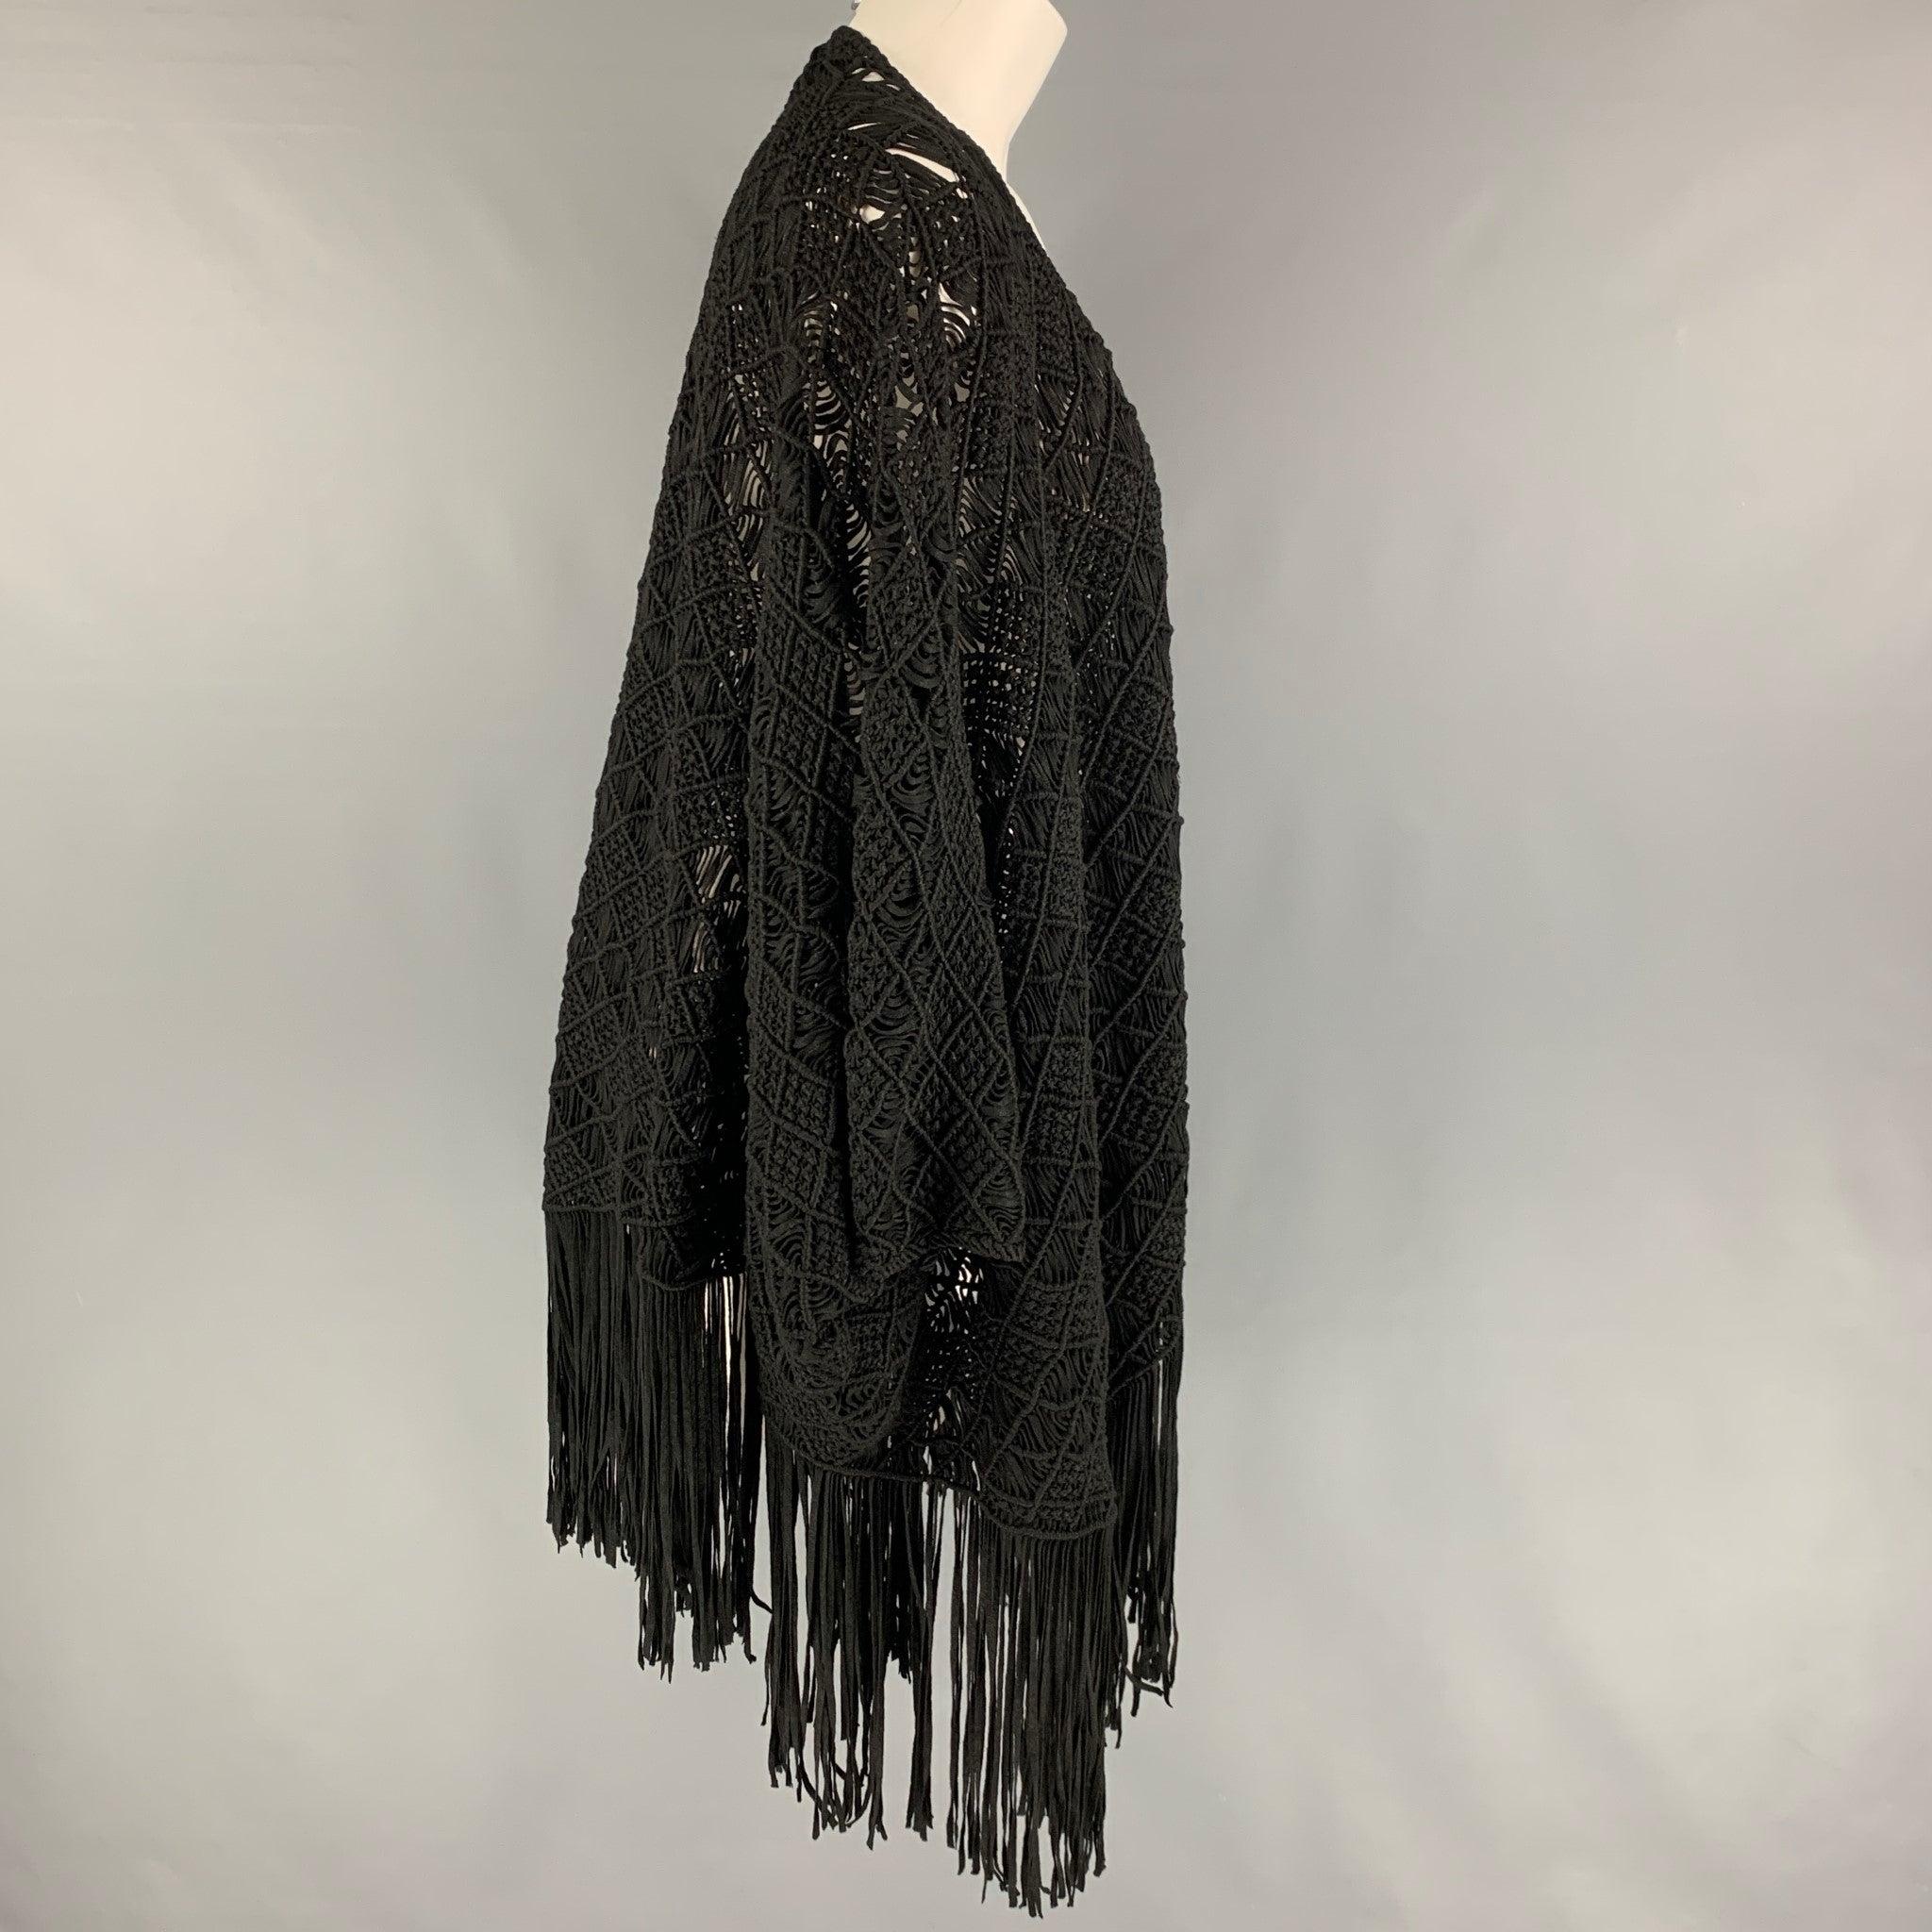 RALPH LAUREN 'Black Label' cape comes in a black knitted viscose / polyester featuring a fringe trim and a open front.
Very Good
Pre-Owned Condition. 

Marked:   M/L 

Measurements: 
 
Shoulder: 57 inches Length: 37 inches 
  
  
 
Reference: